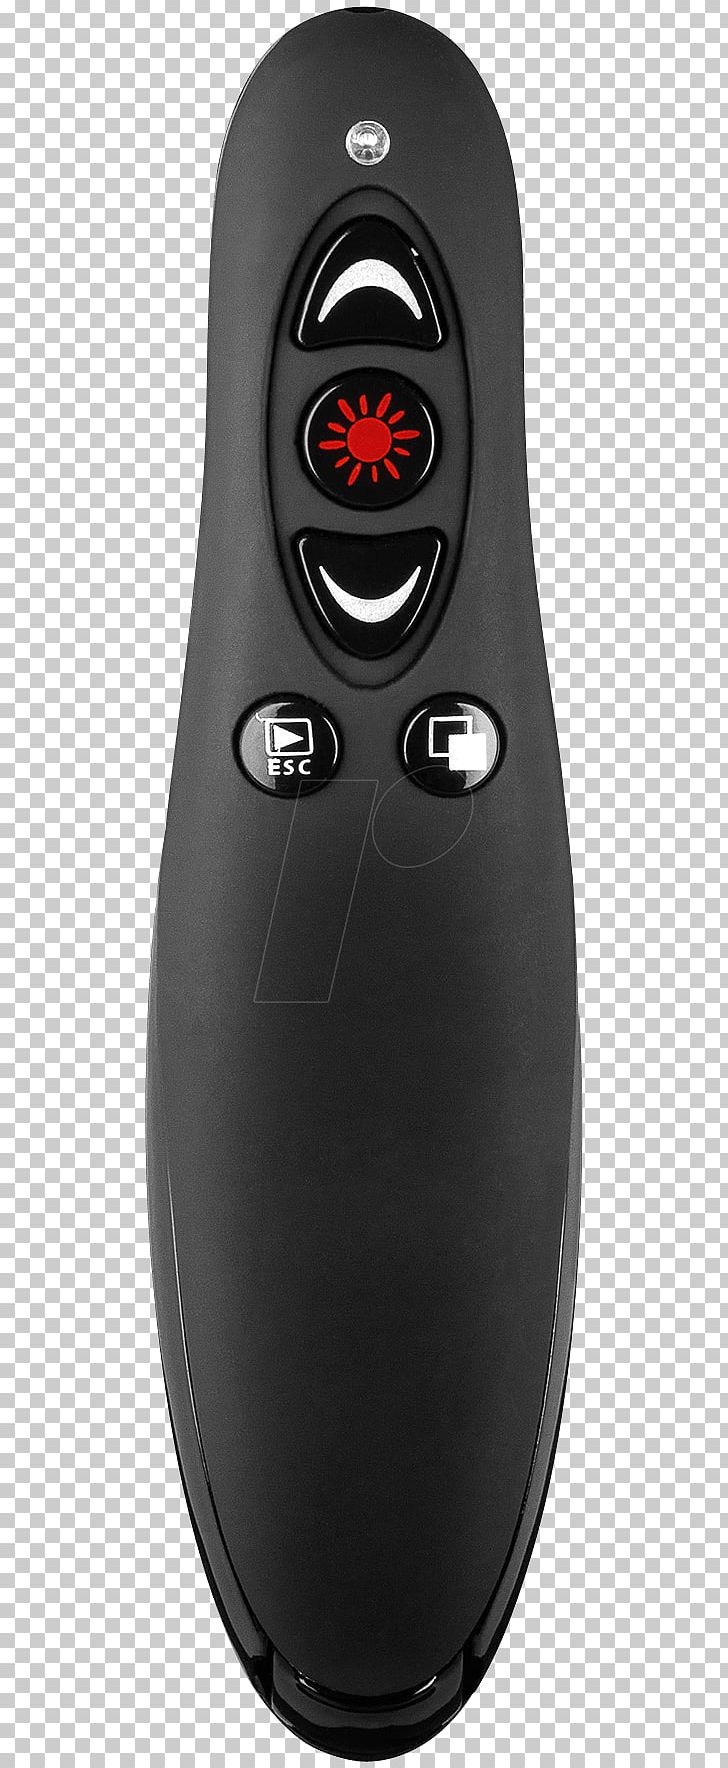 Laptop Presentation Remote Controls Electronics Accessory Laser Pointers PNG, Clipart, Allinone, Barebone Computers, Computer, Computer Hardware, Electronic Device Free PNG Download